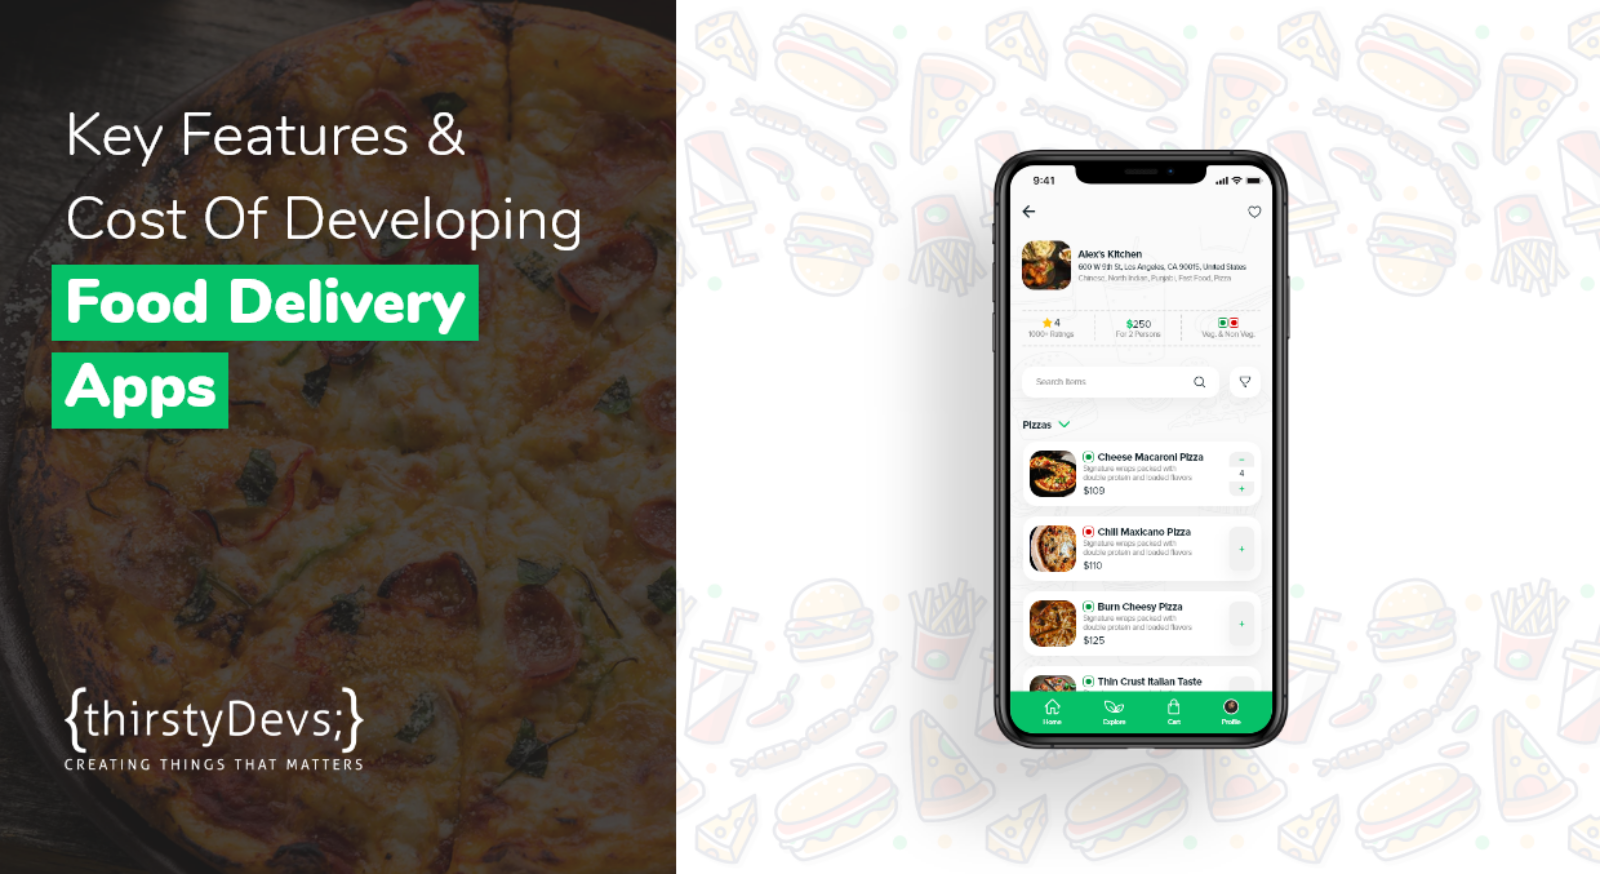 Key Features & Cost of Developing Food Delivery Apps